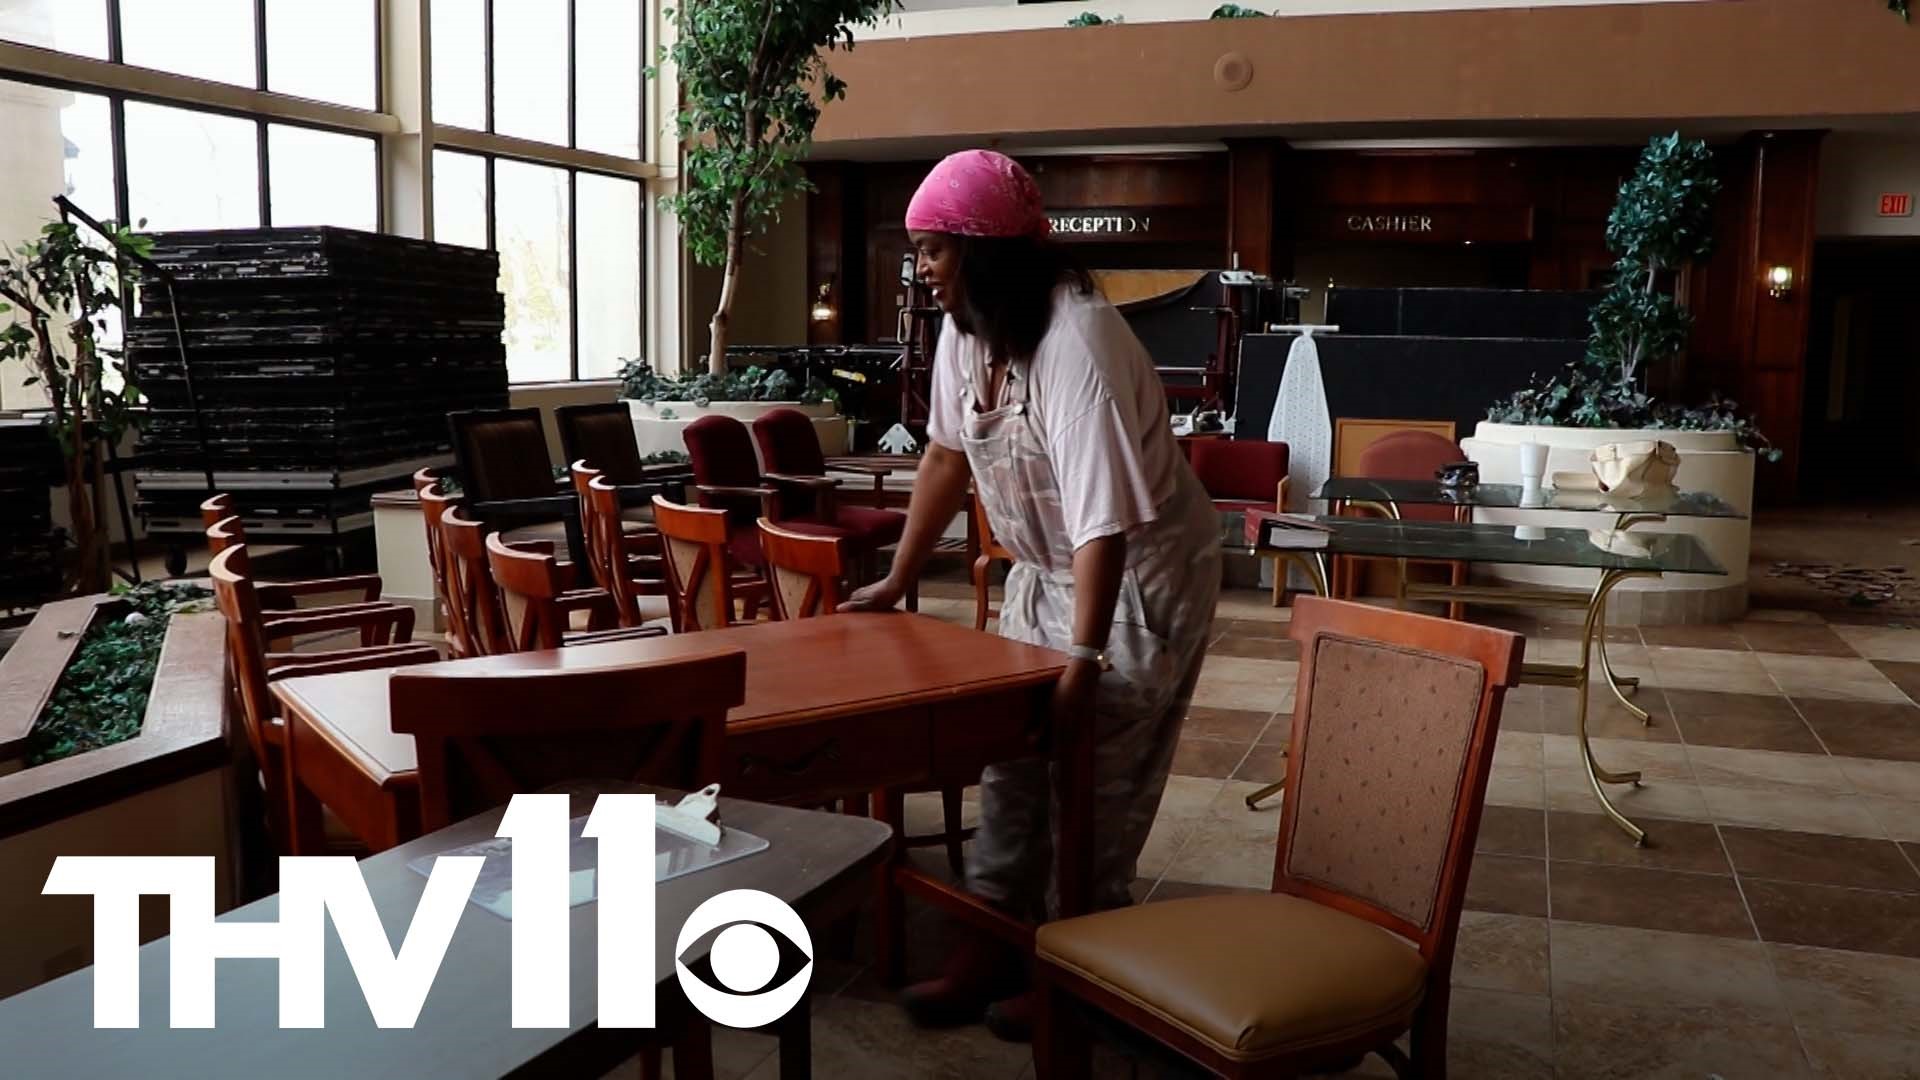 The Plaza Hotel in Pine Bluff has sat empty for years after shutting down. Now, they're selling old items to raise money towards building new homes.